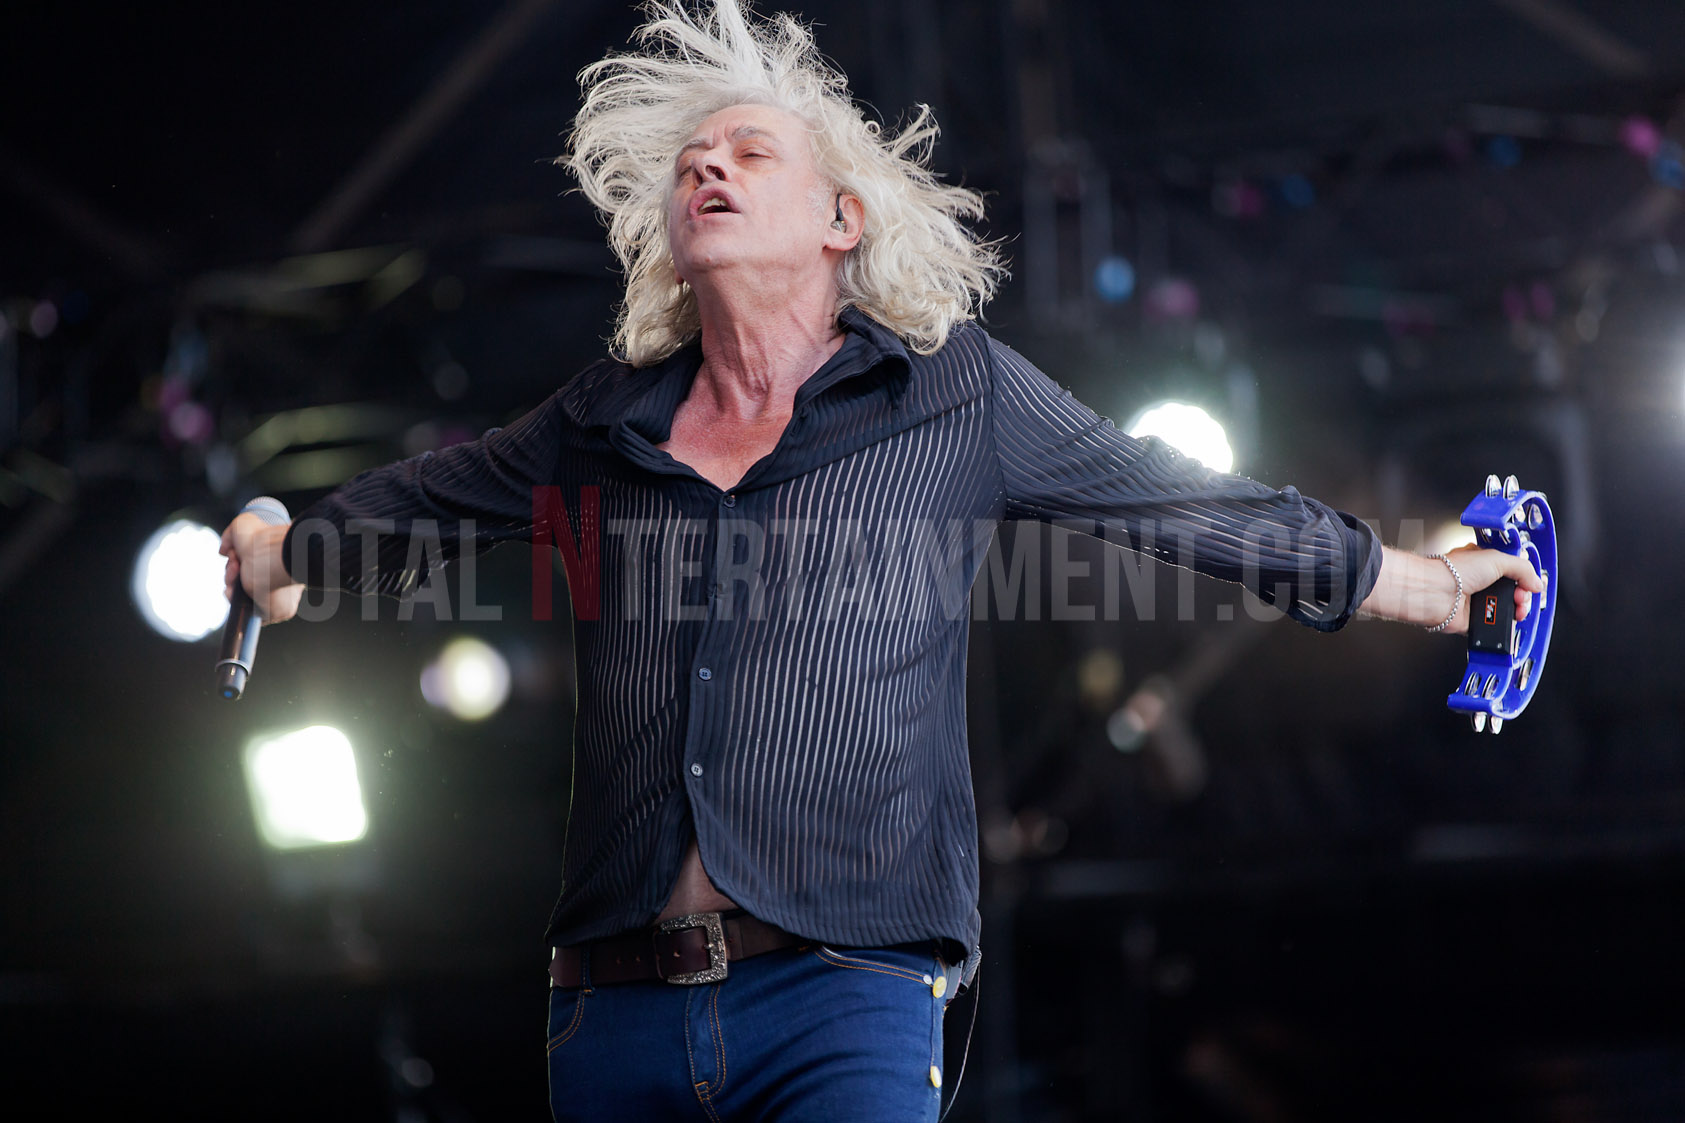 Boomtown Rats, Rewind North, Festival, TotalNtertainment, Review, Jo Forrest